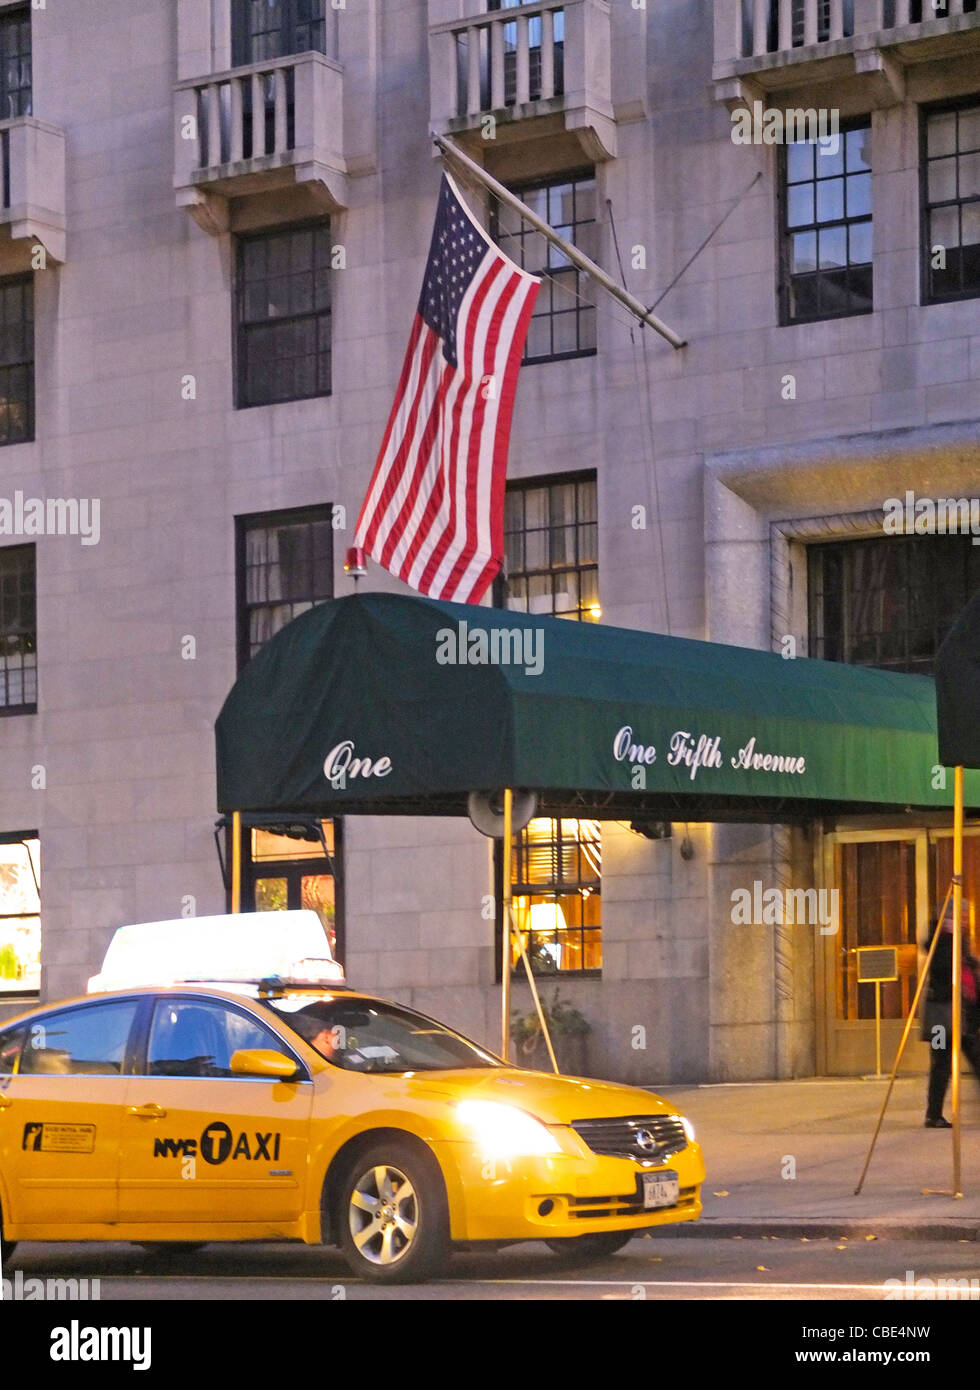 New York City Taxi at One Fifth Avenue building Stock Photo